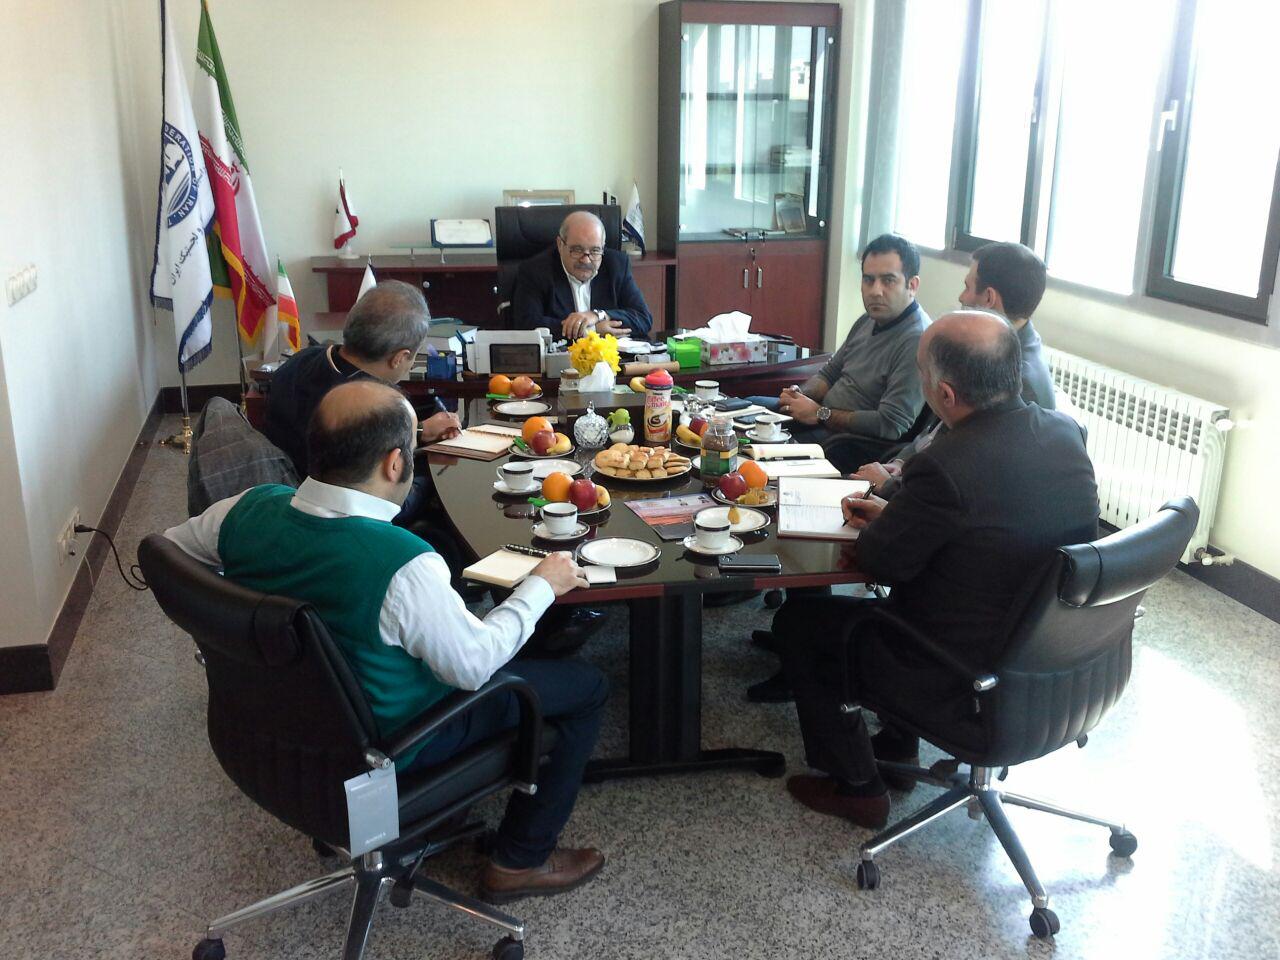 A counsult meeting among the manages of the Kaleh holding company and board of directors of the Federation